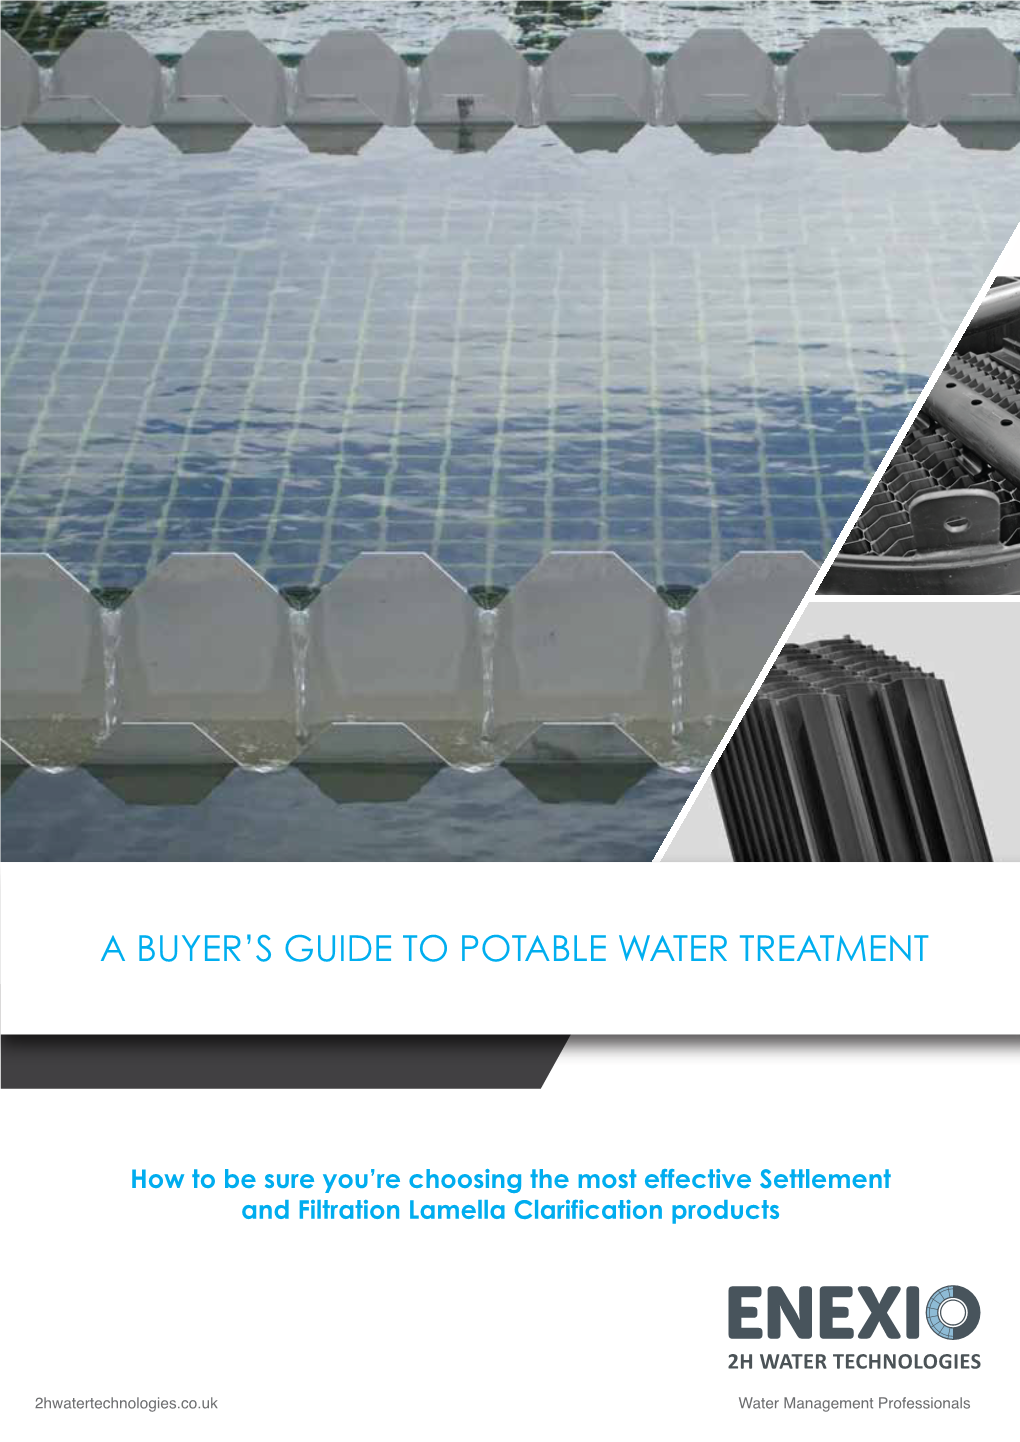 A Buyer's Guide to Potable Water Treatment